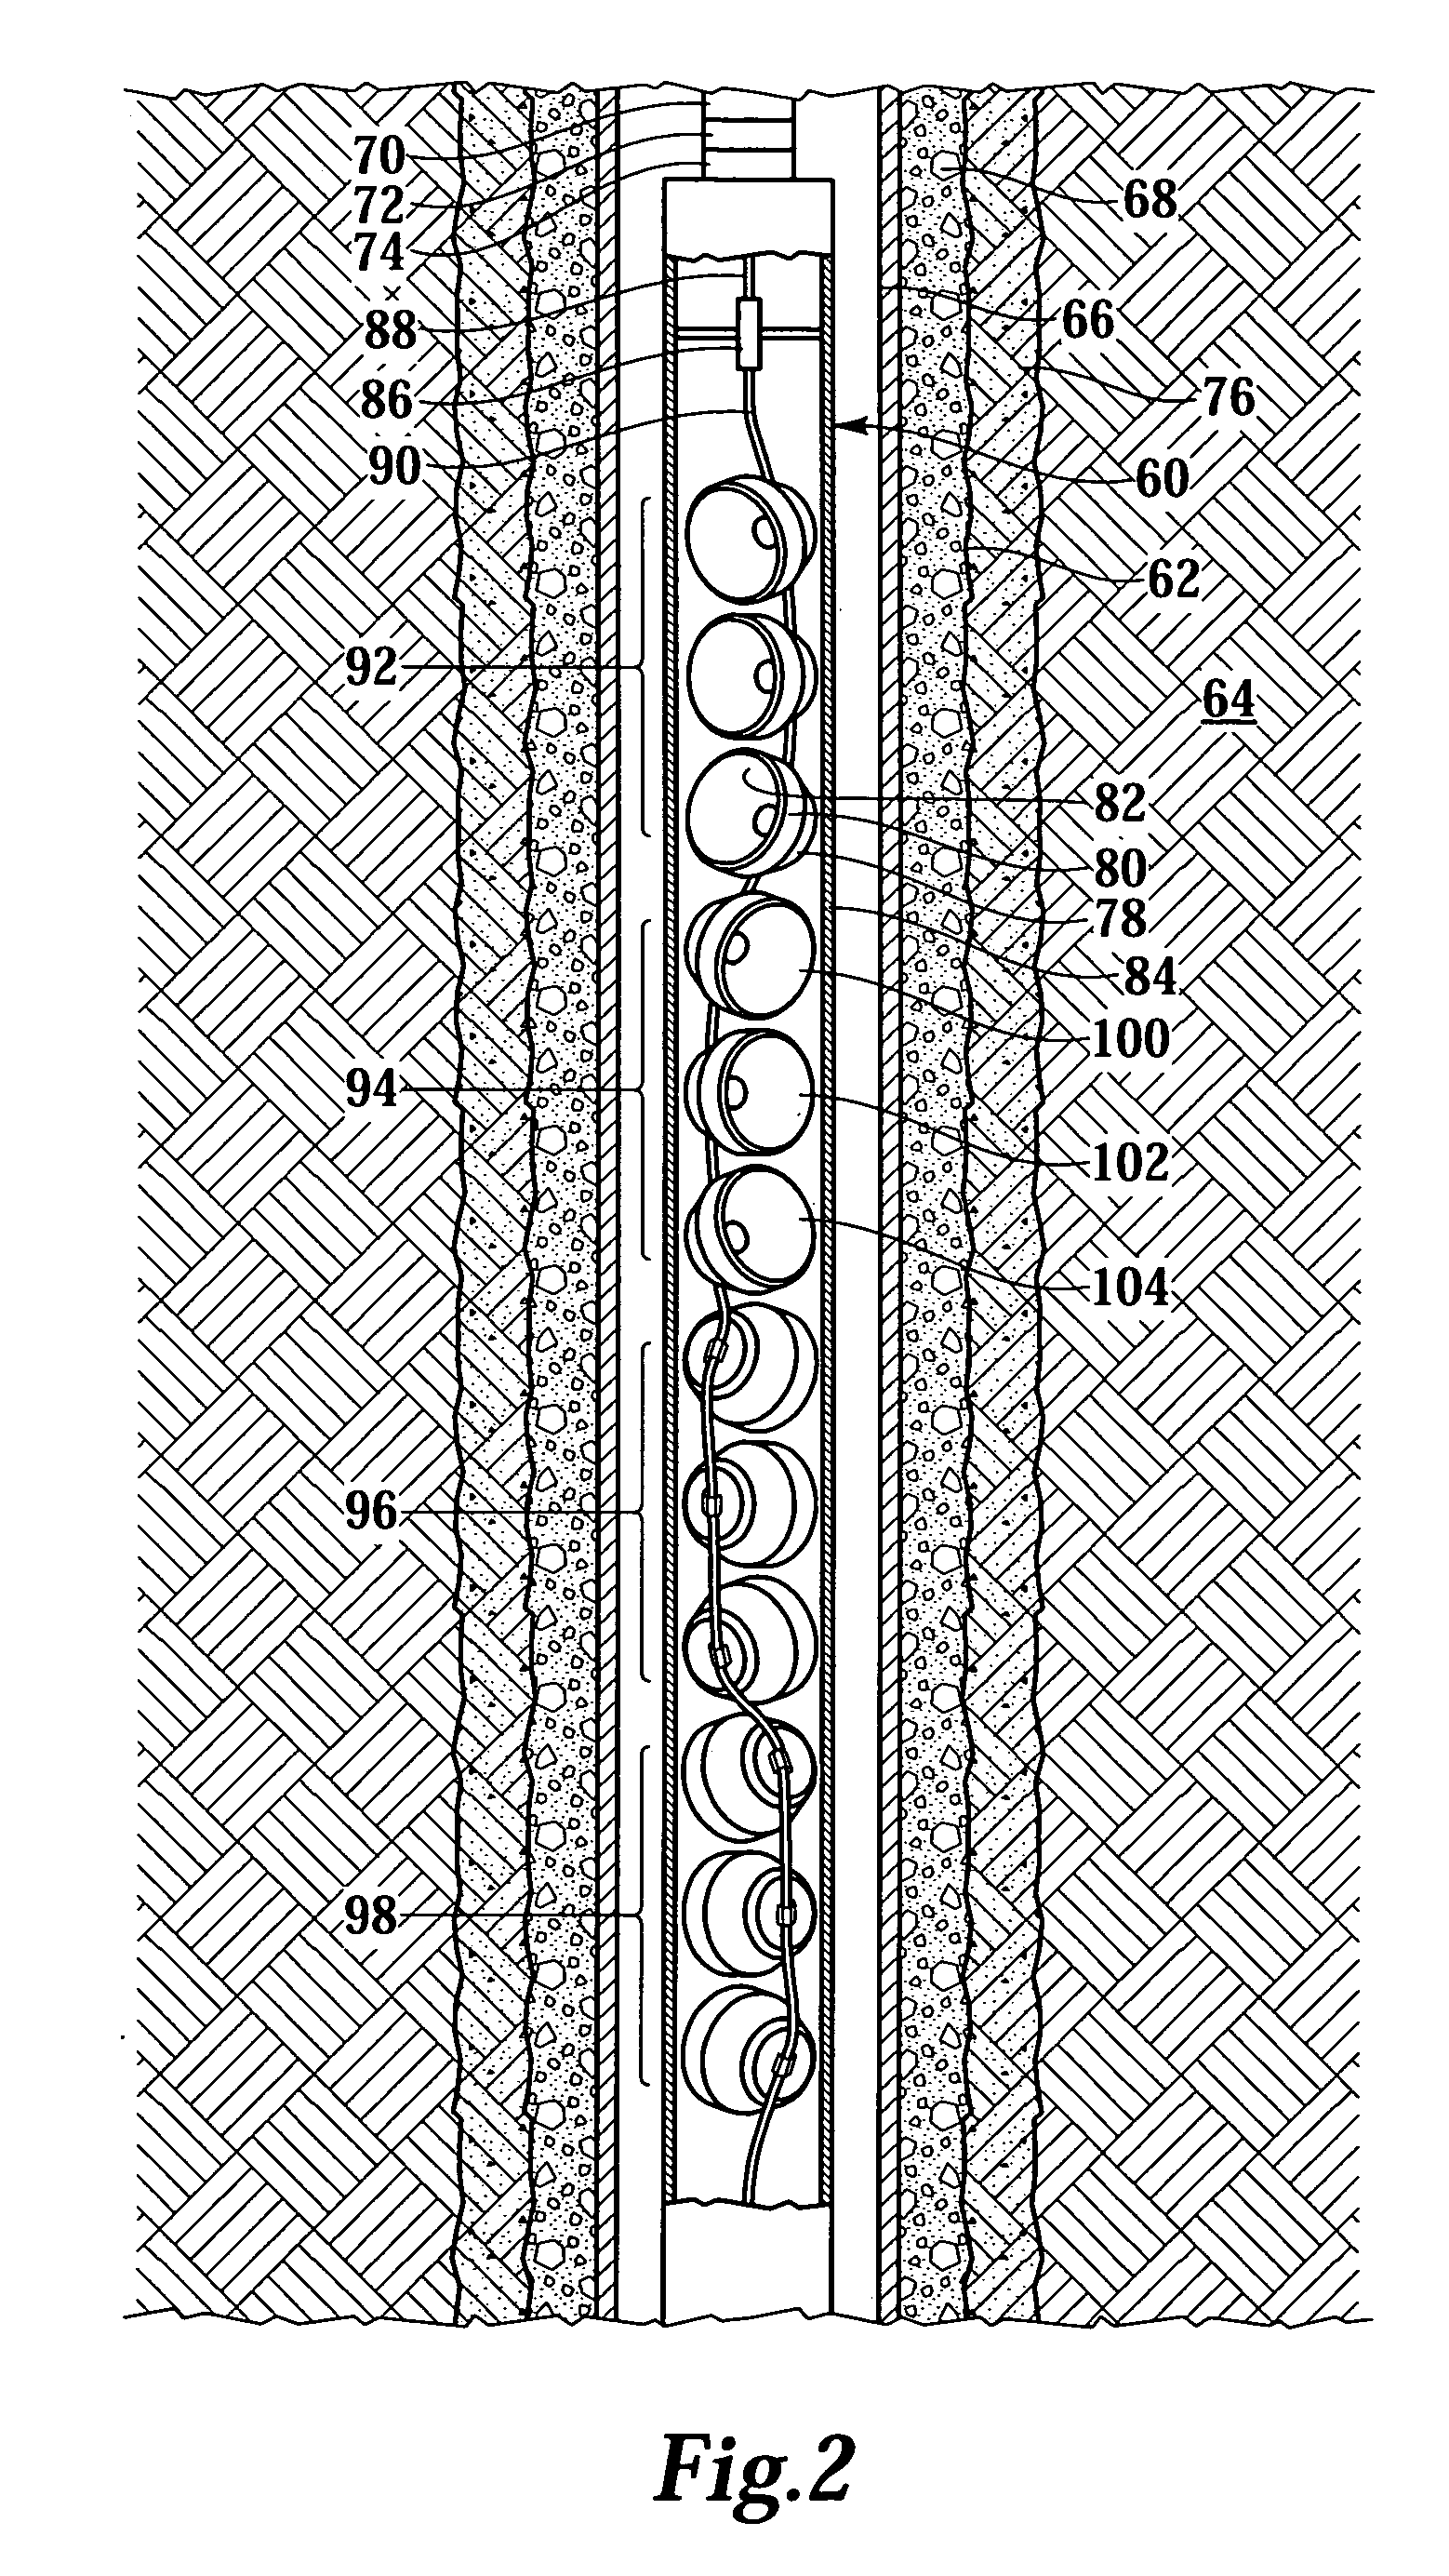 Perforating gun assembly and method for creating perforation cavities